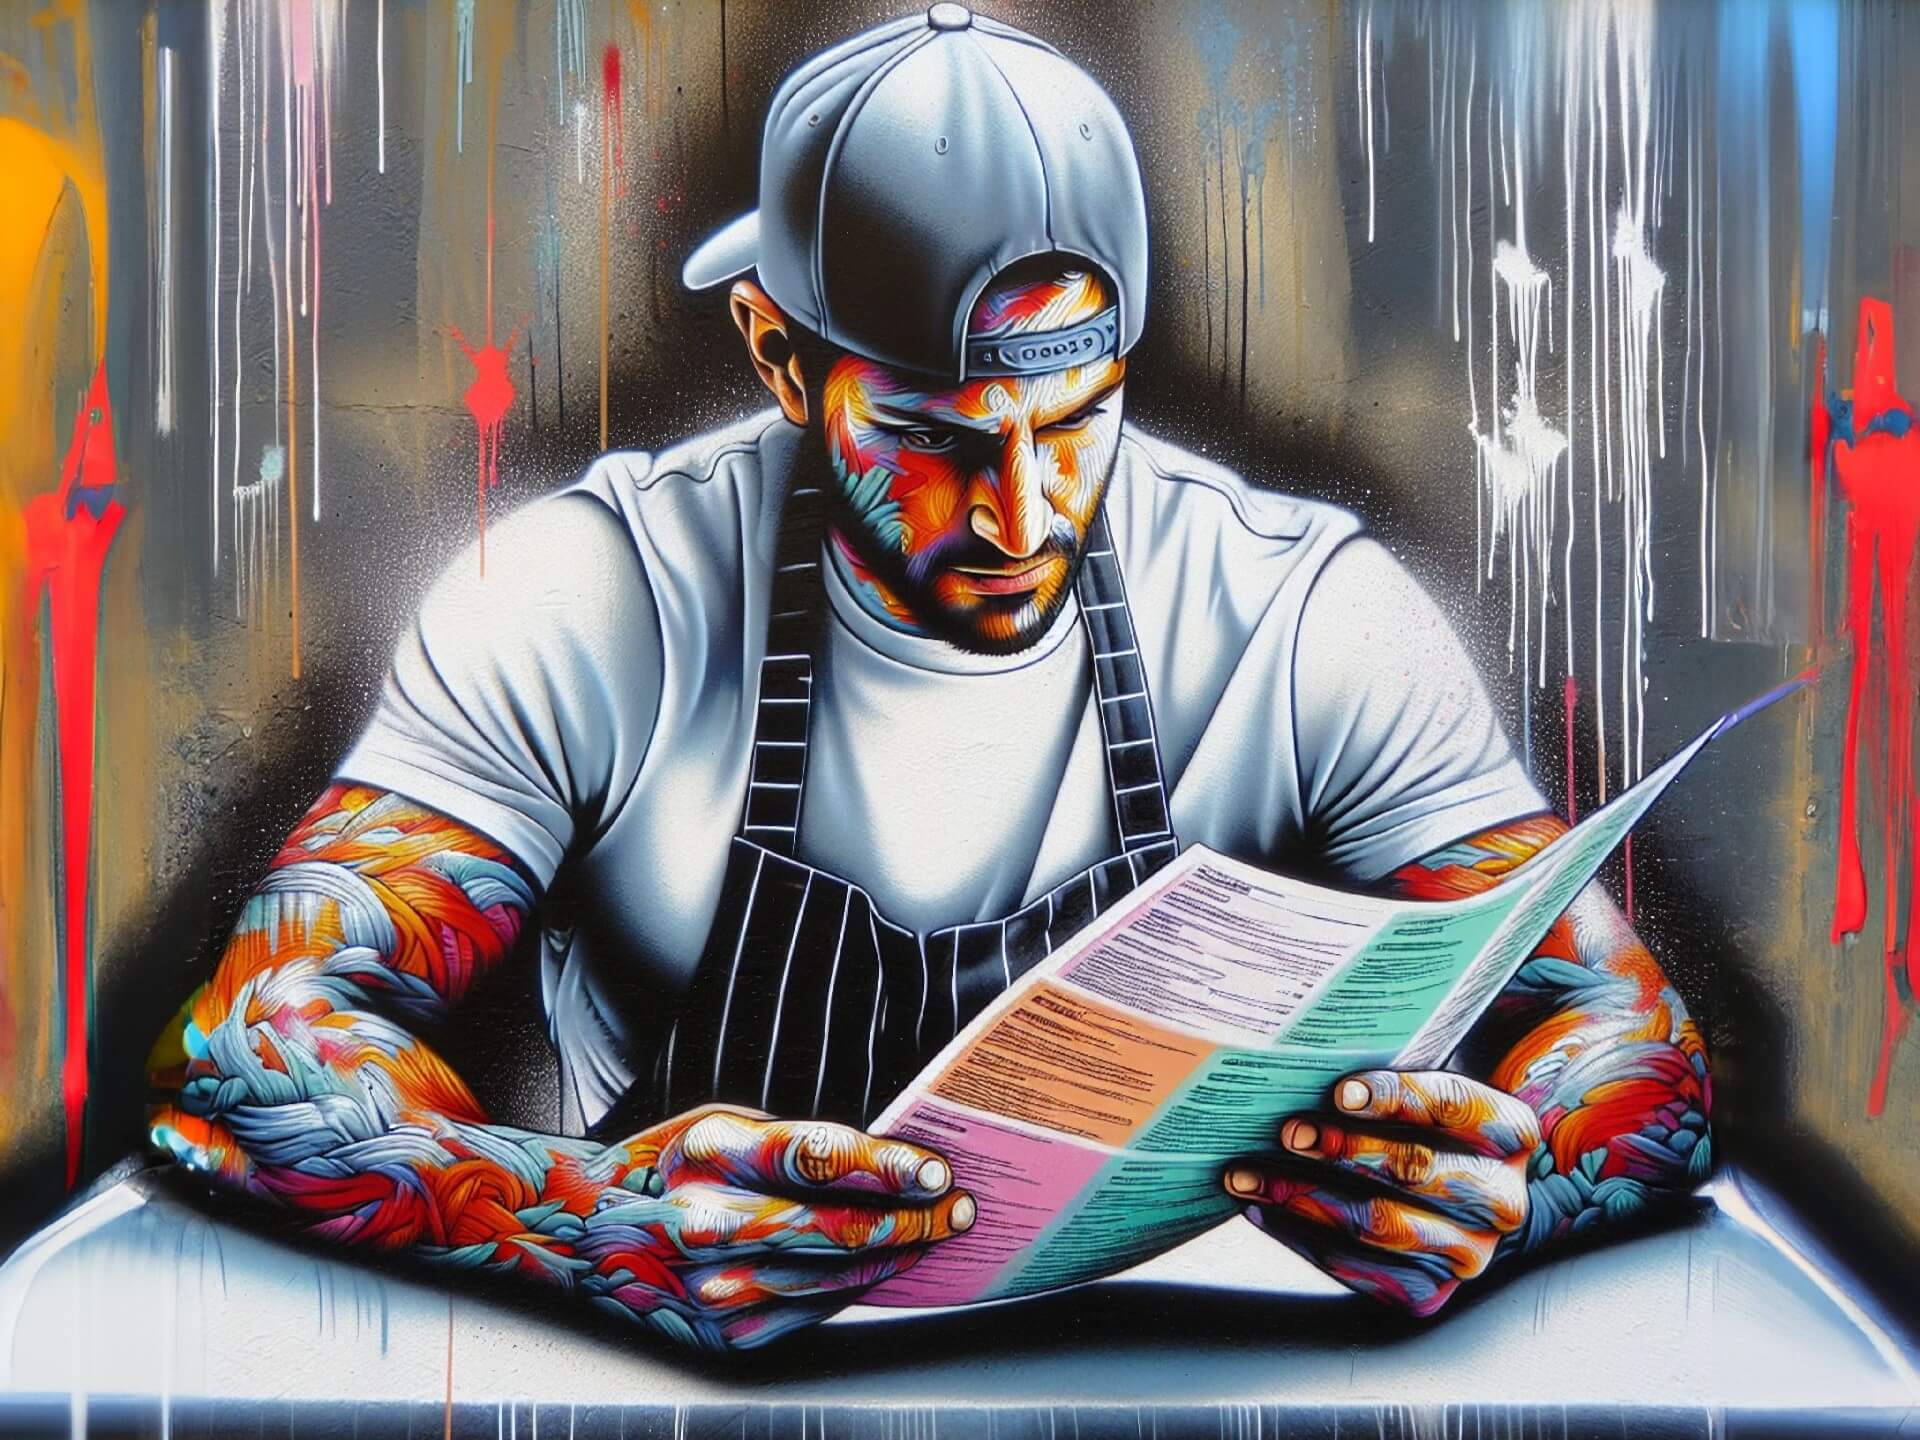 Street art-style, AI-generated image of a chef holding a color-coded recipe sheet